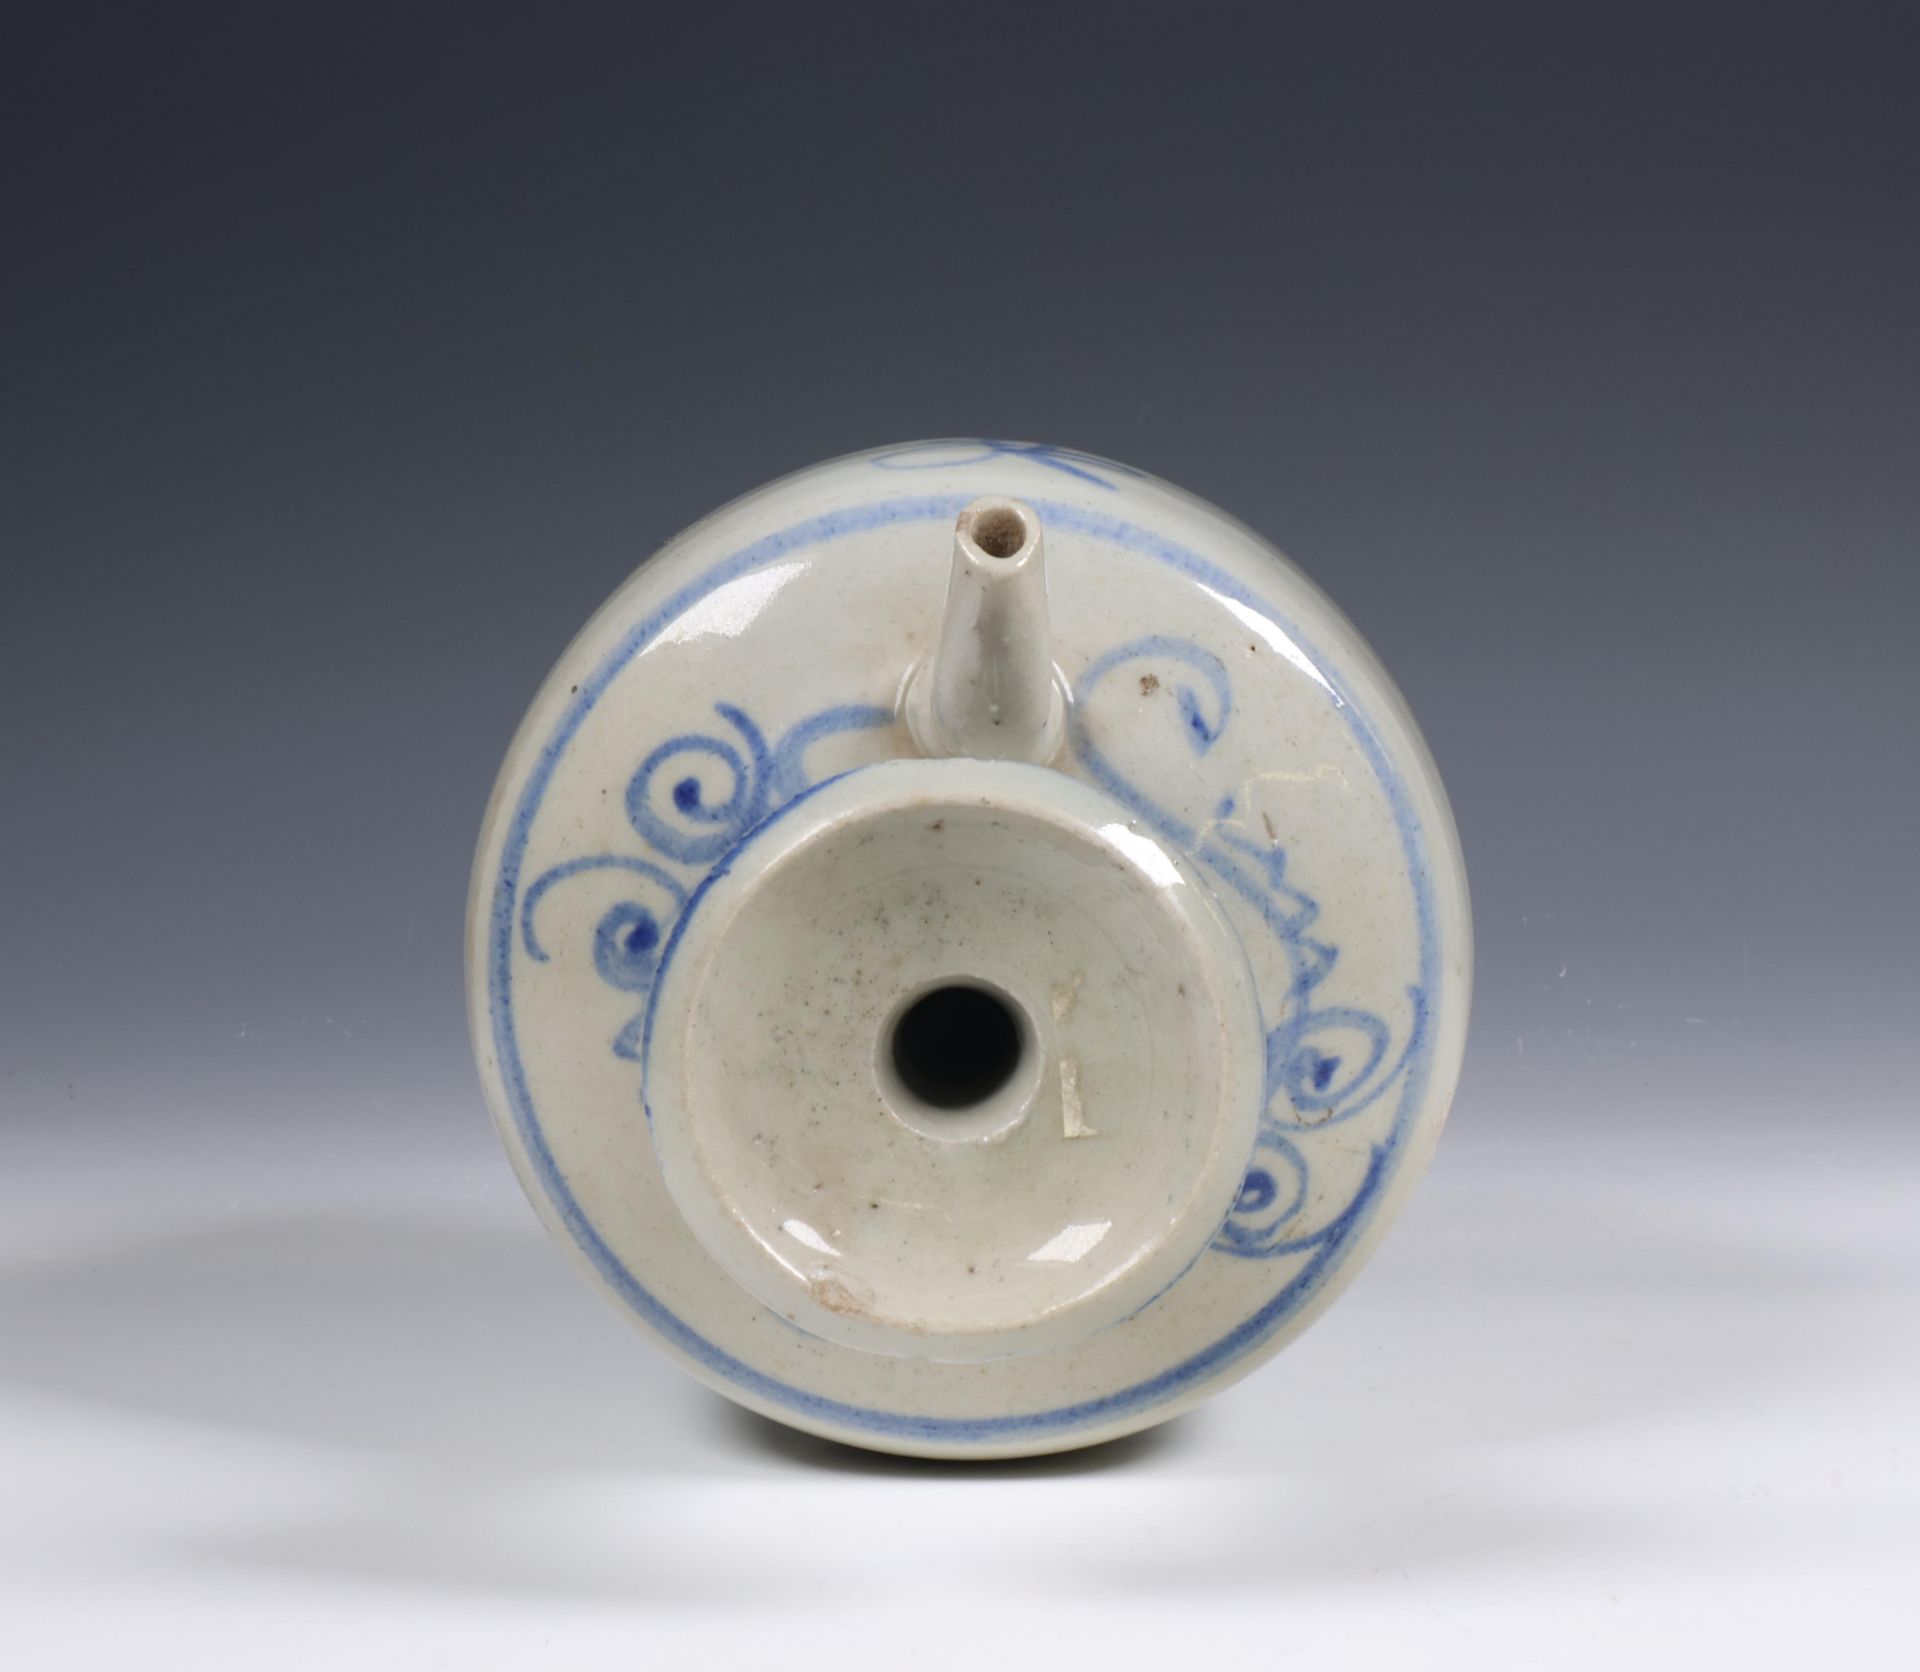 China/ Vietnam, blue and white glazed earthenware water-pot, 20th century, - Image 4 of 6